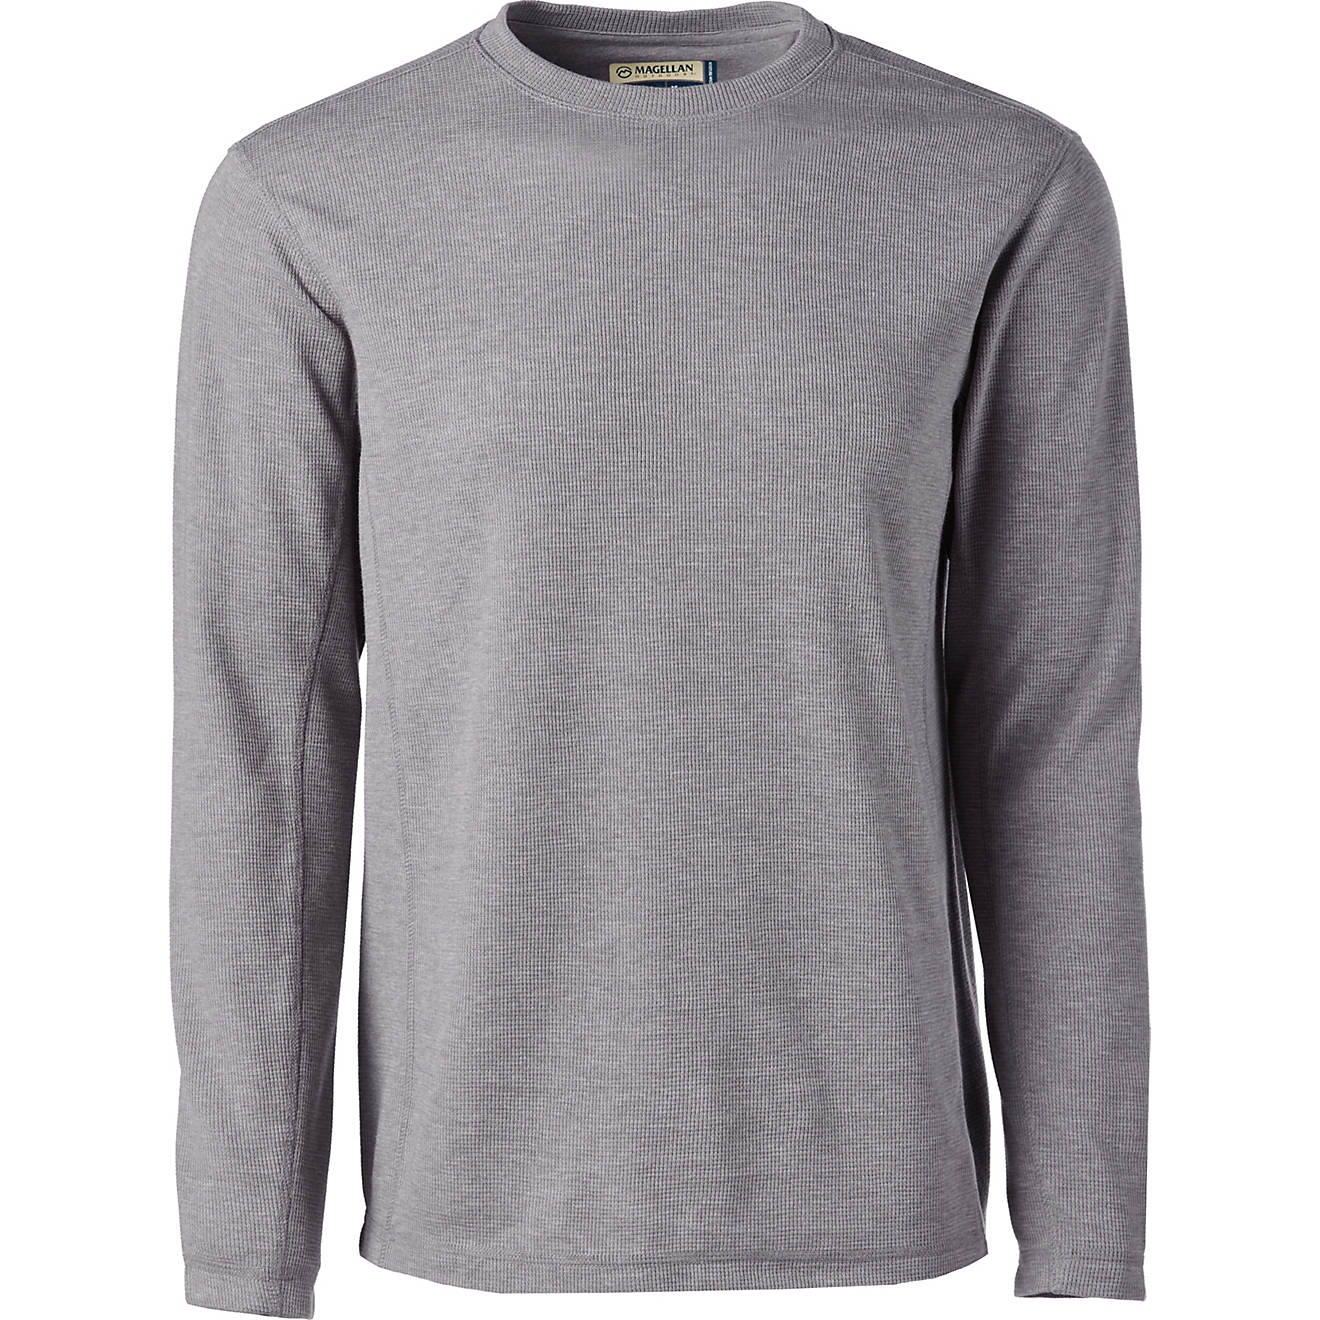 Magellan Outdoors Men's Base Camp Thermal Heathered Long Sleeve Crew Top                                                         - view number 1